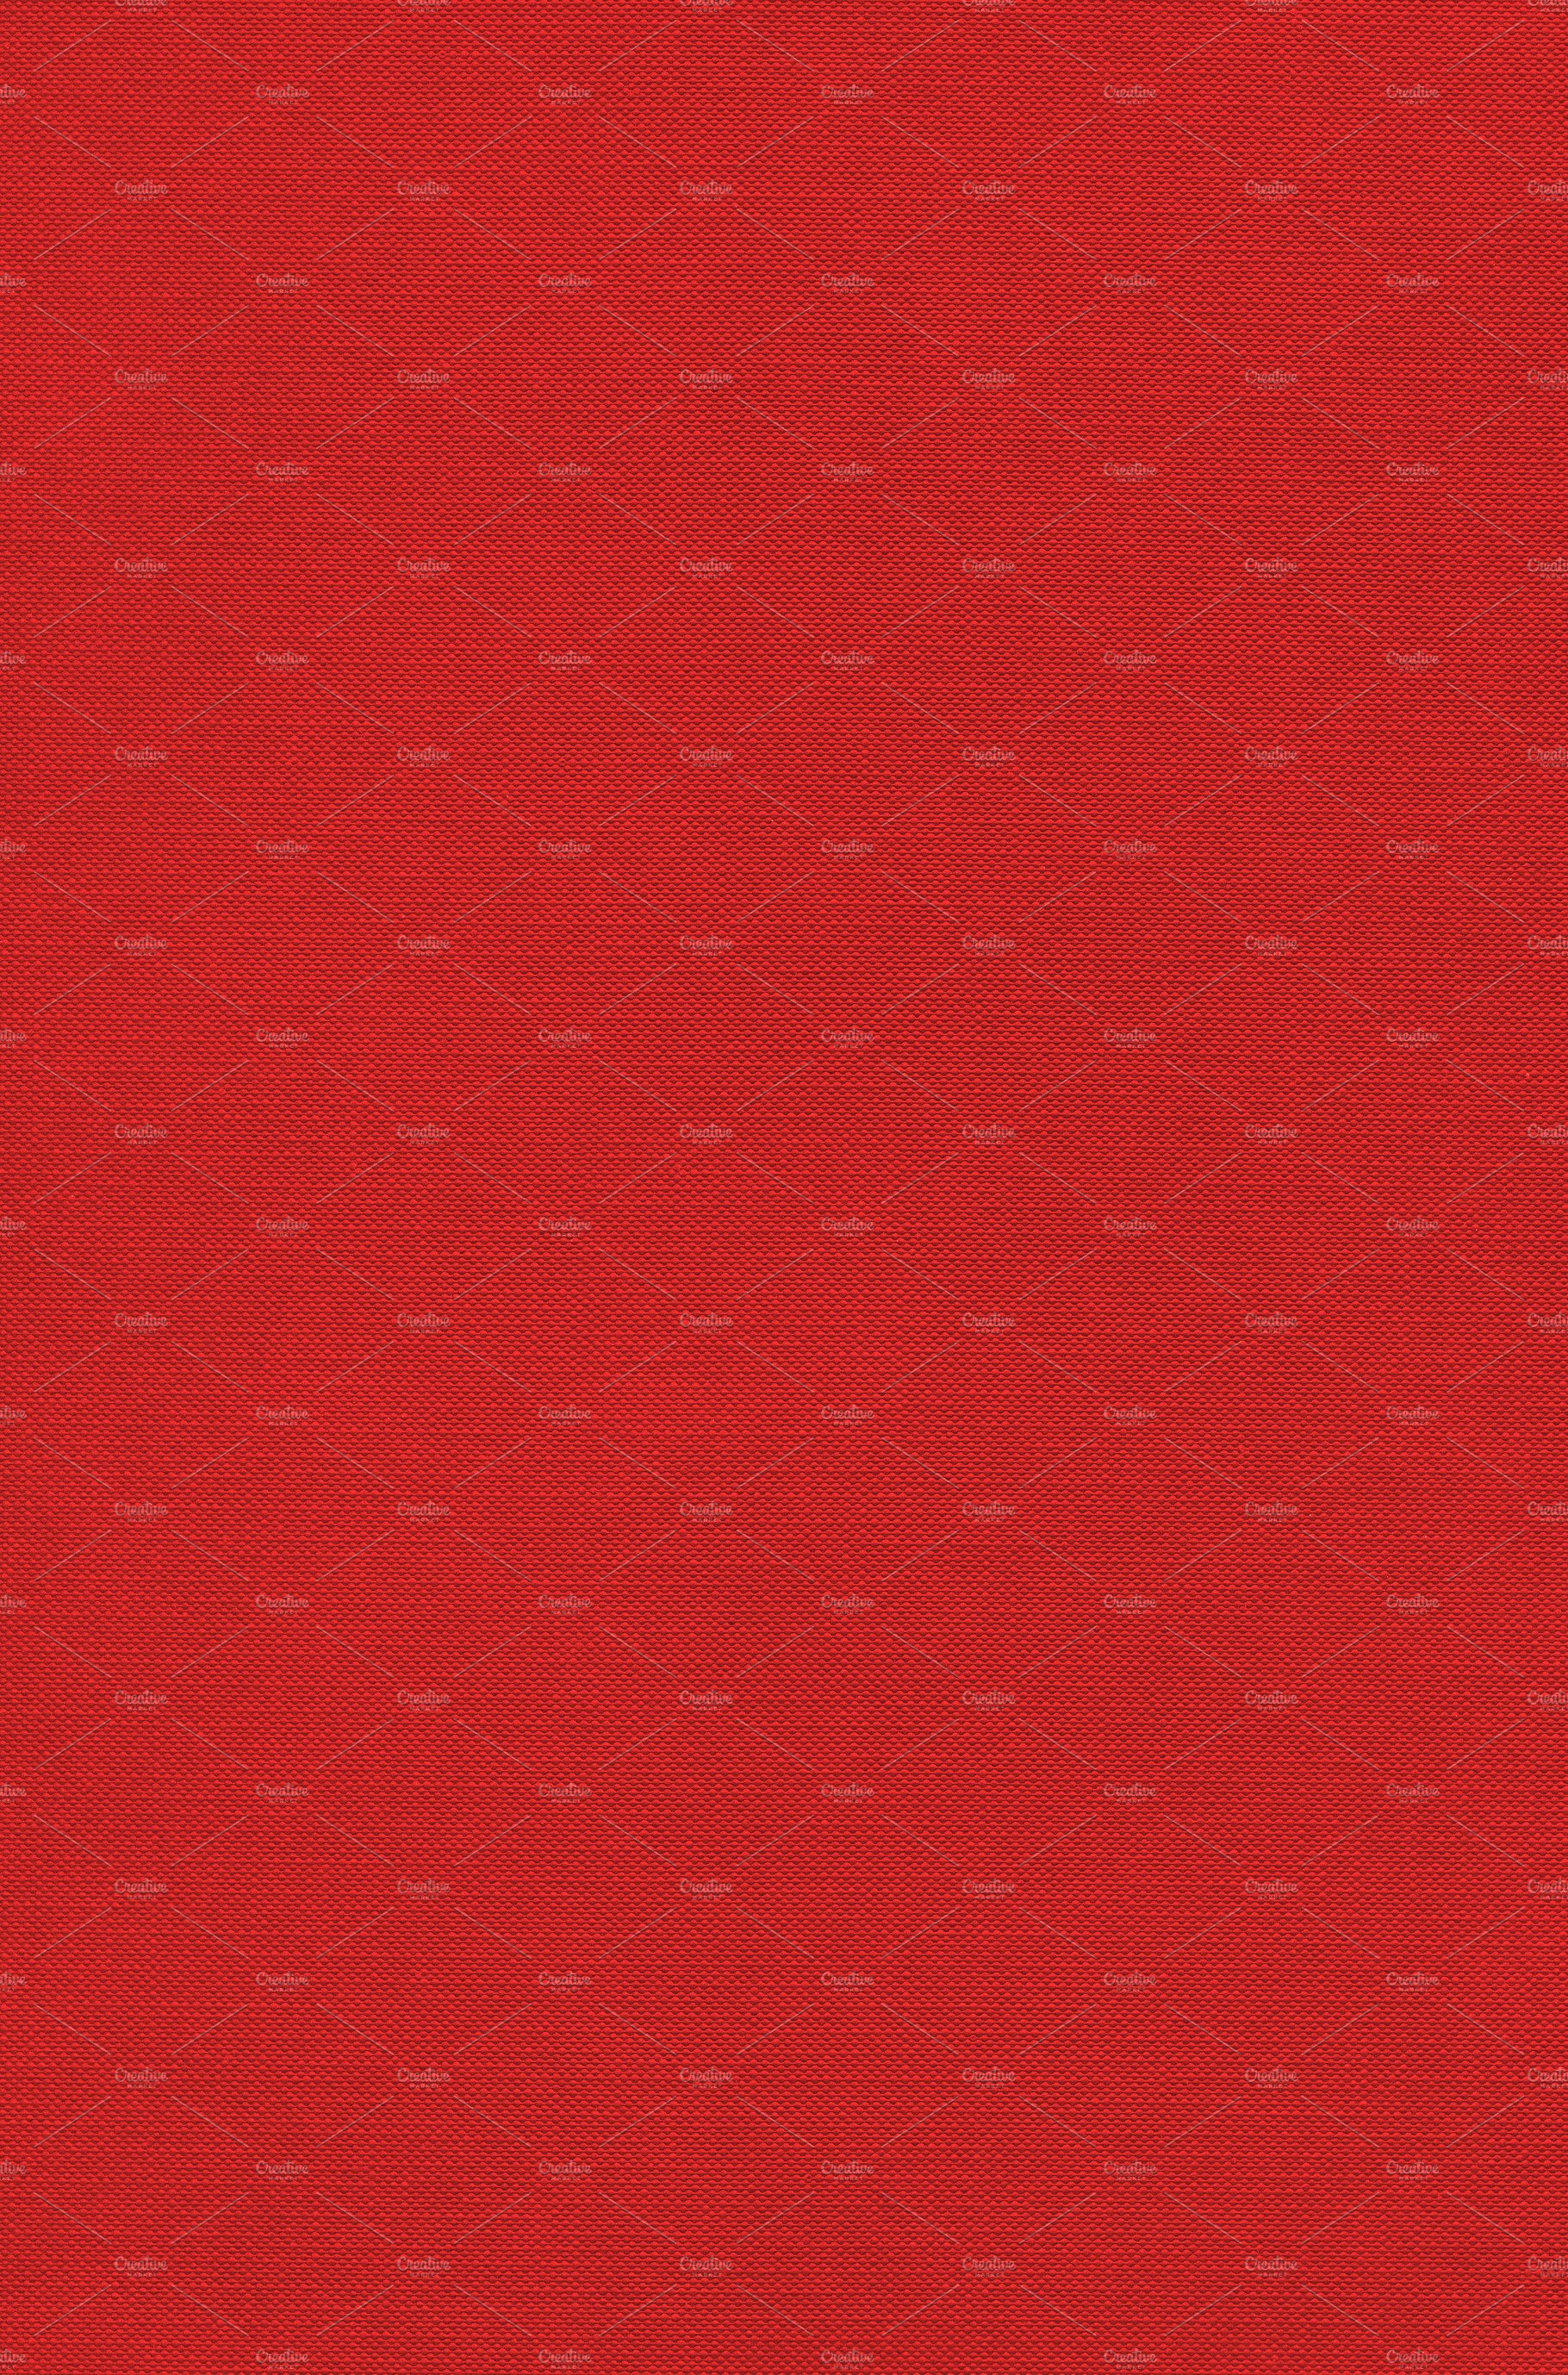 Red canvas texture background cover image.